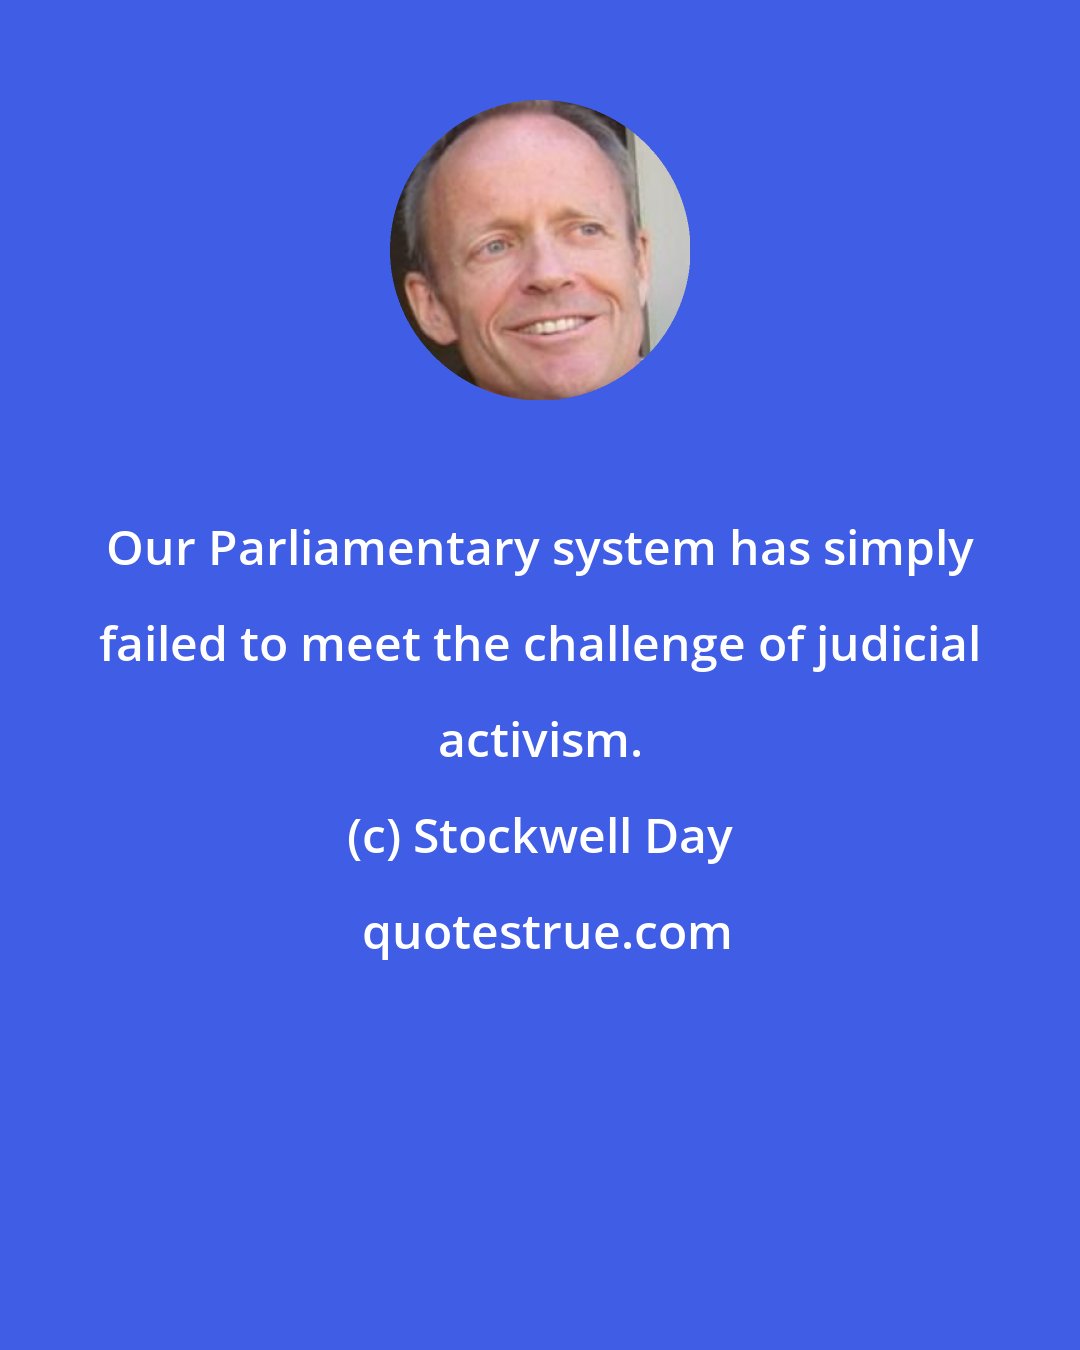 Stockwell Day: Our Parliamentary system has simply failed to meet the challenge of judicial activism.